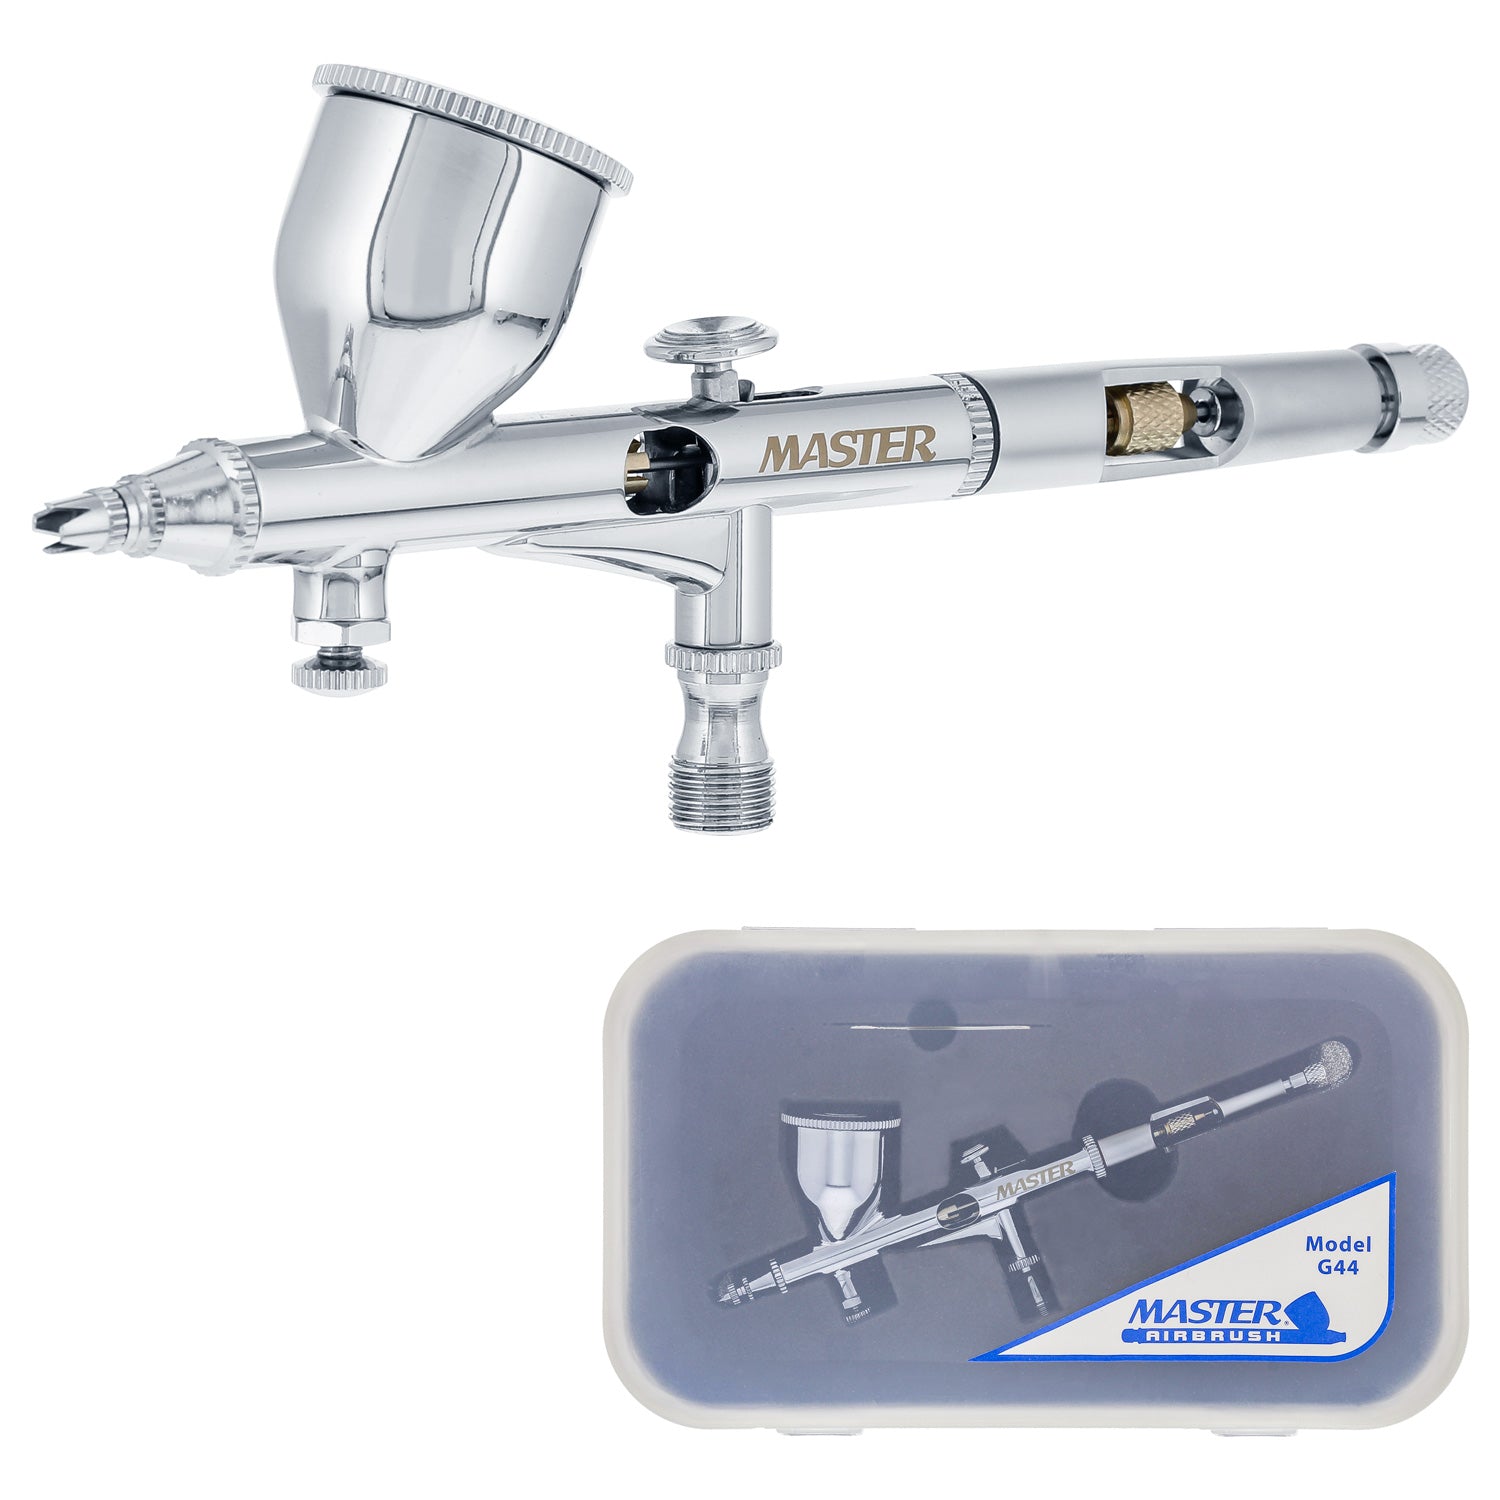 Master Airbrush Review